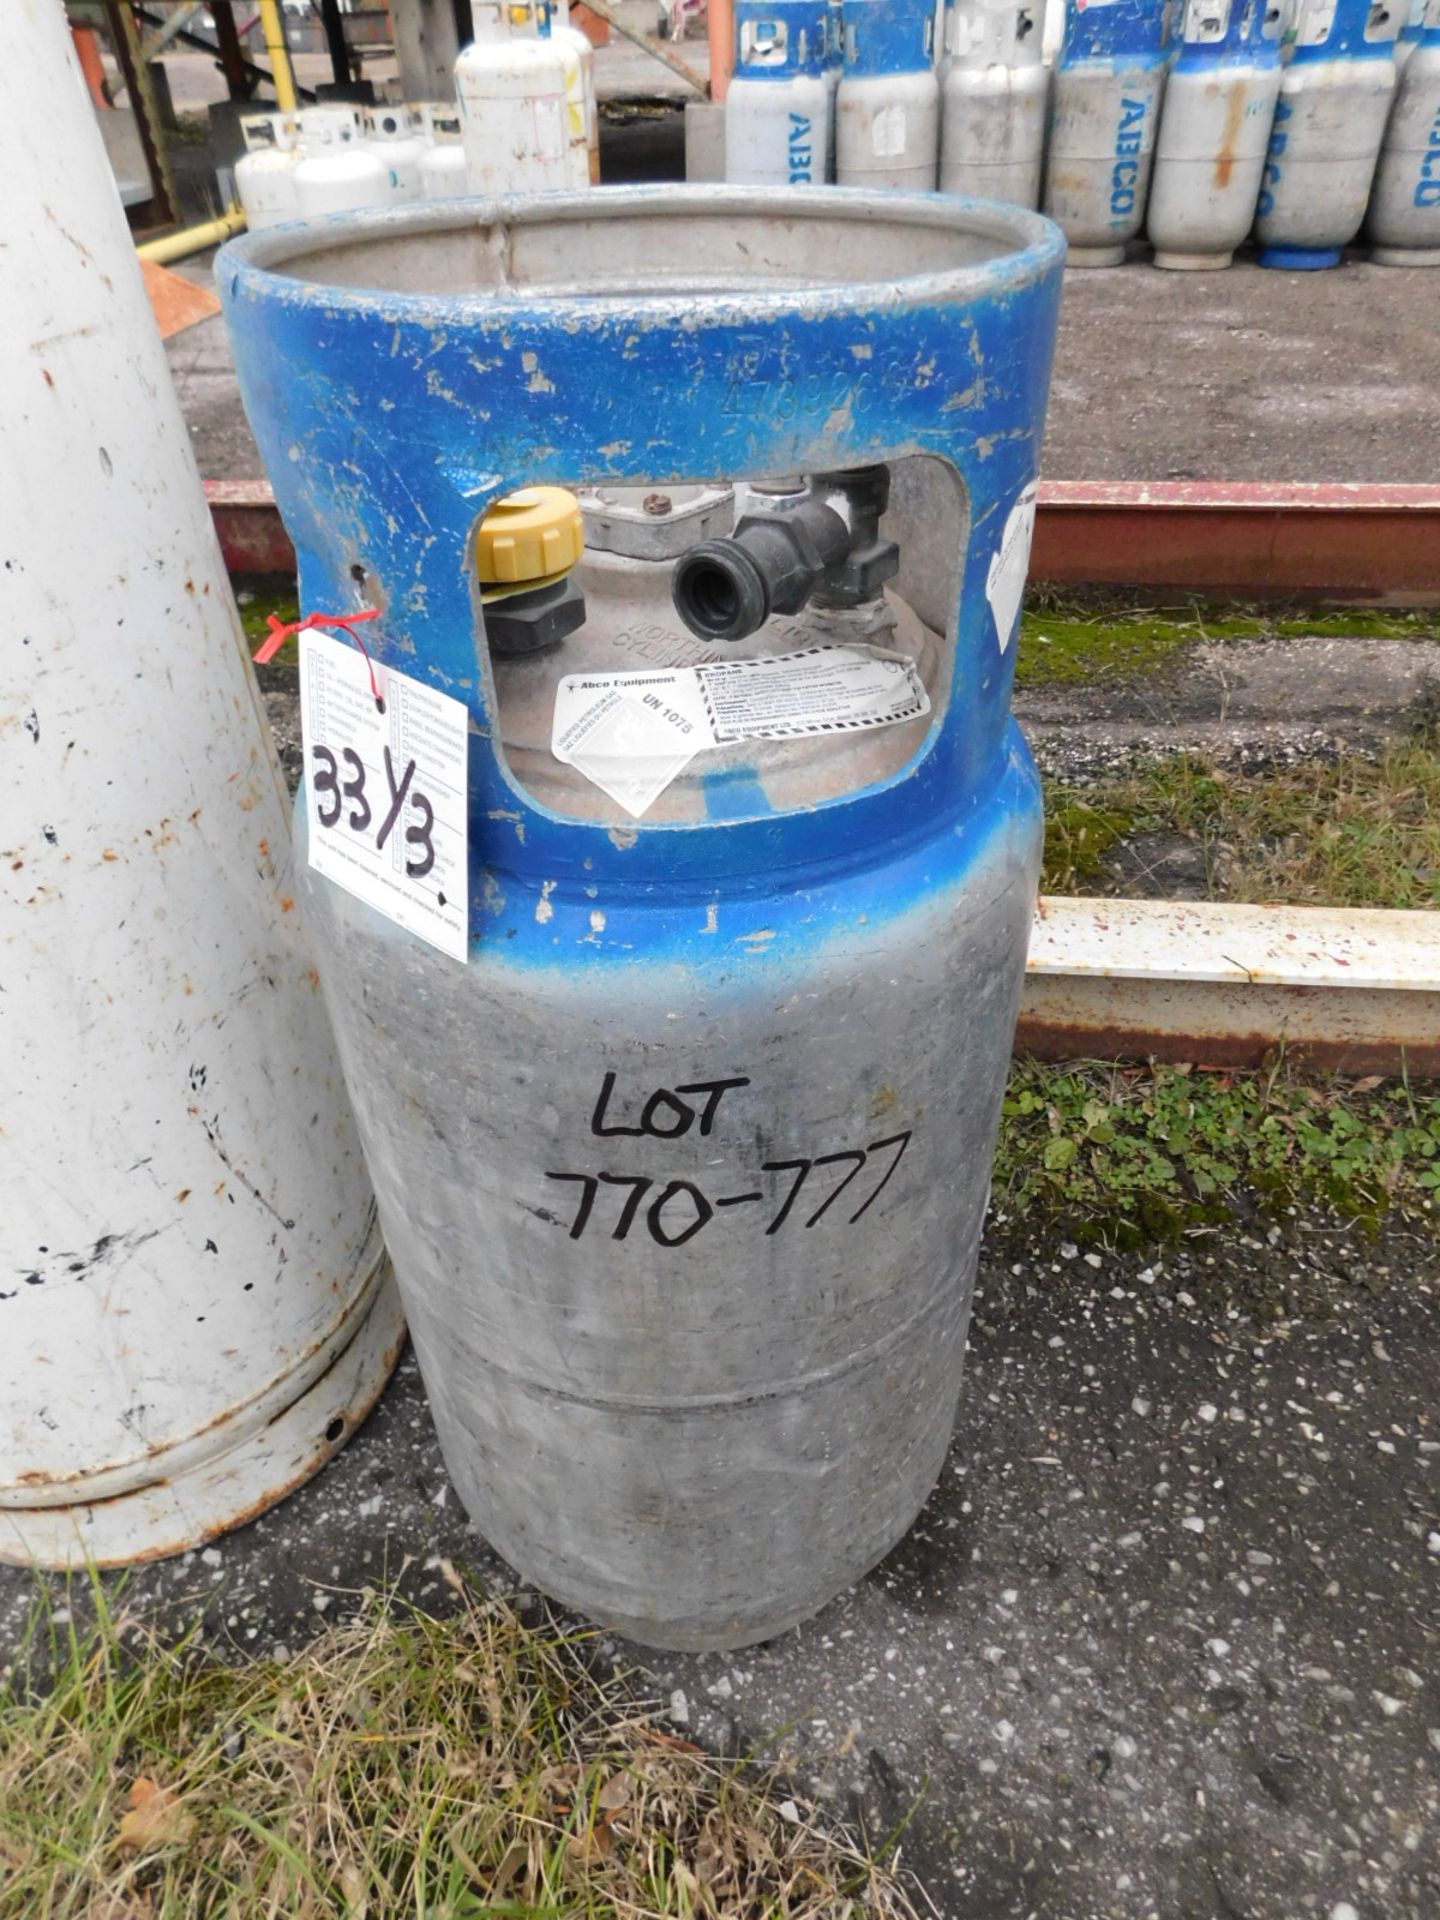 331/3LB PROPANE VAPOR TANKS (OUTDATED)